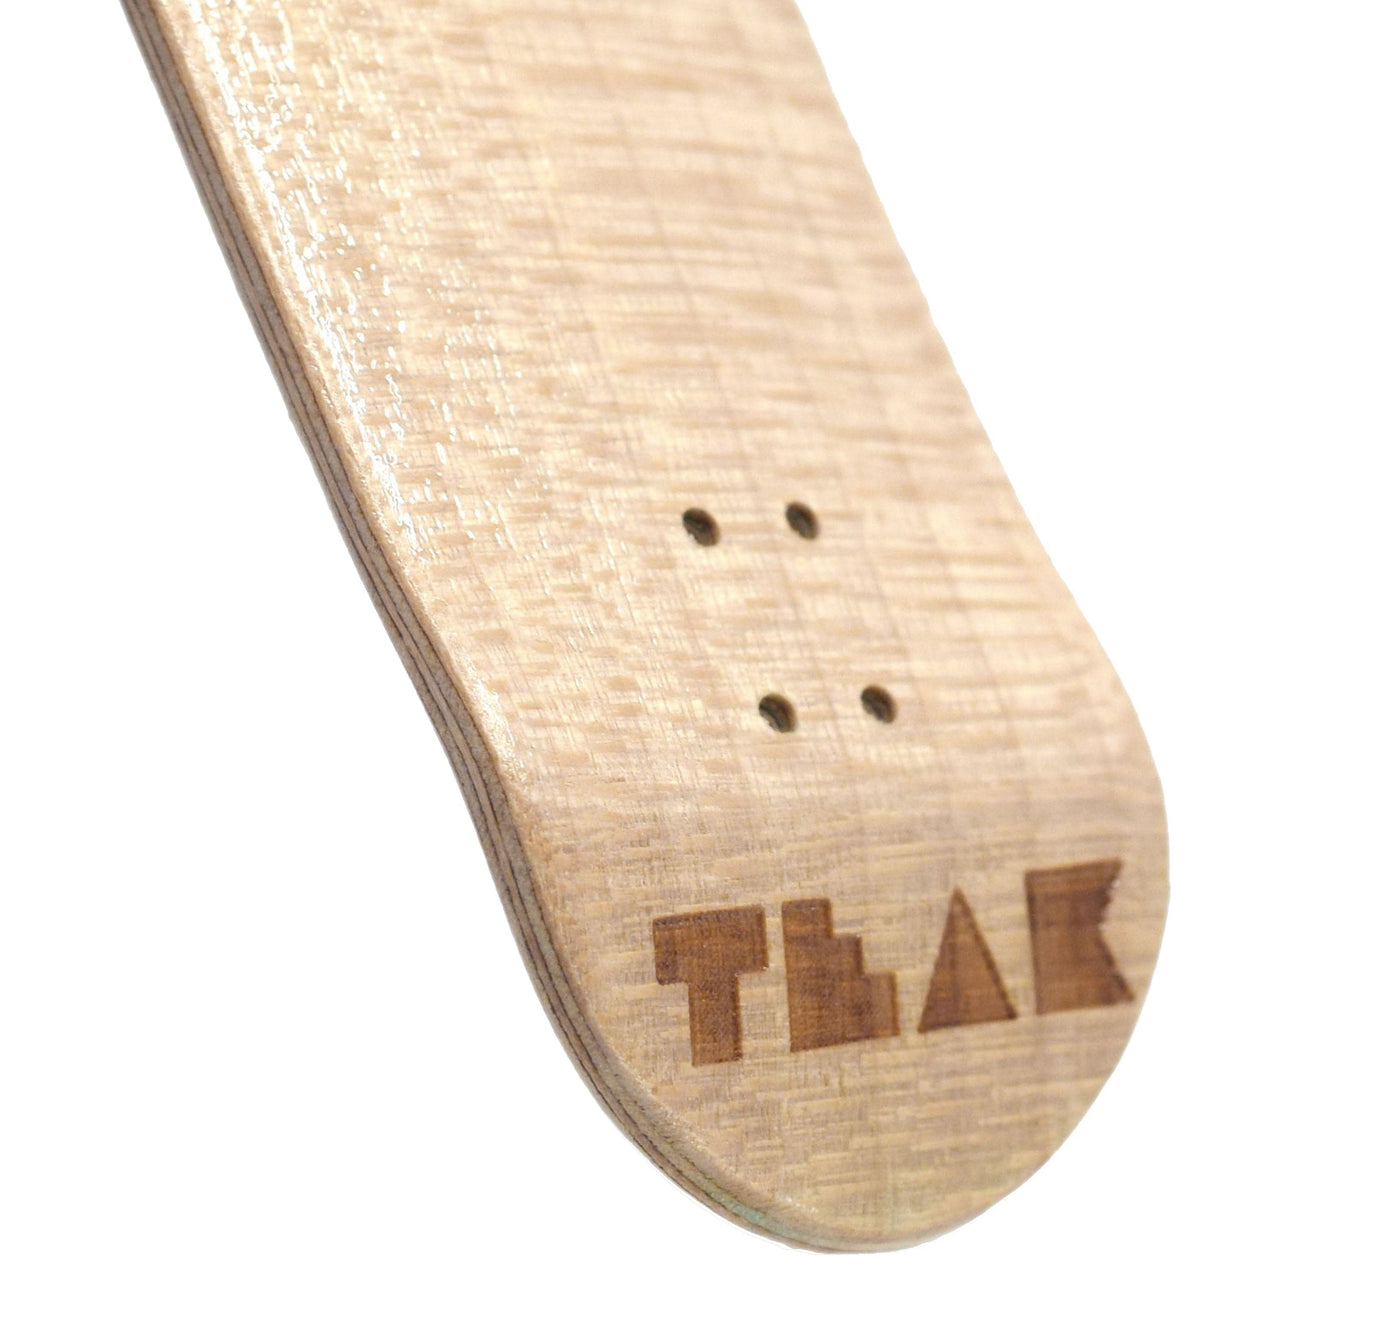 Teak Tuning PROlific Wooden 5 Ply Fingerboard Deck 35x95mm - The Classic - with Color Matching Mid Ply